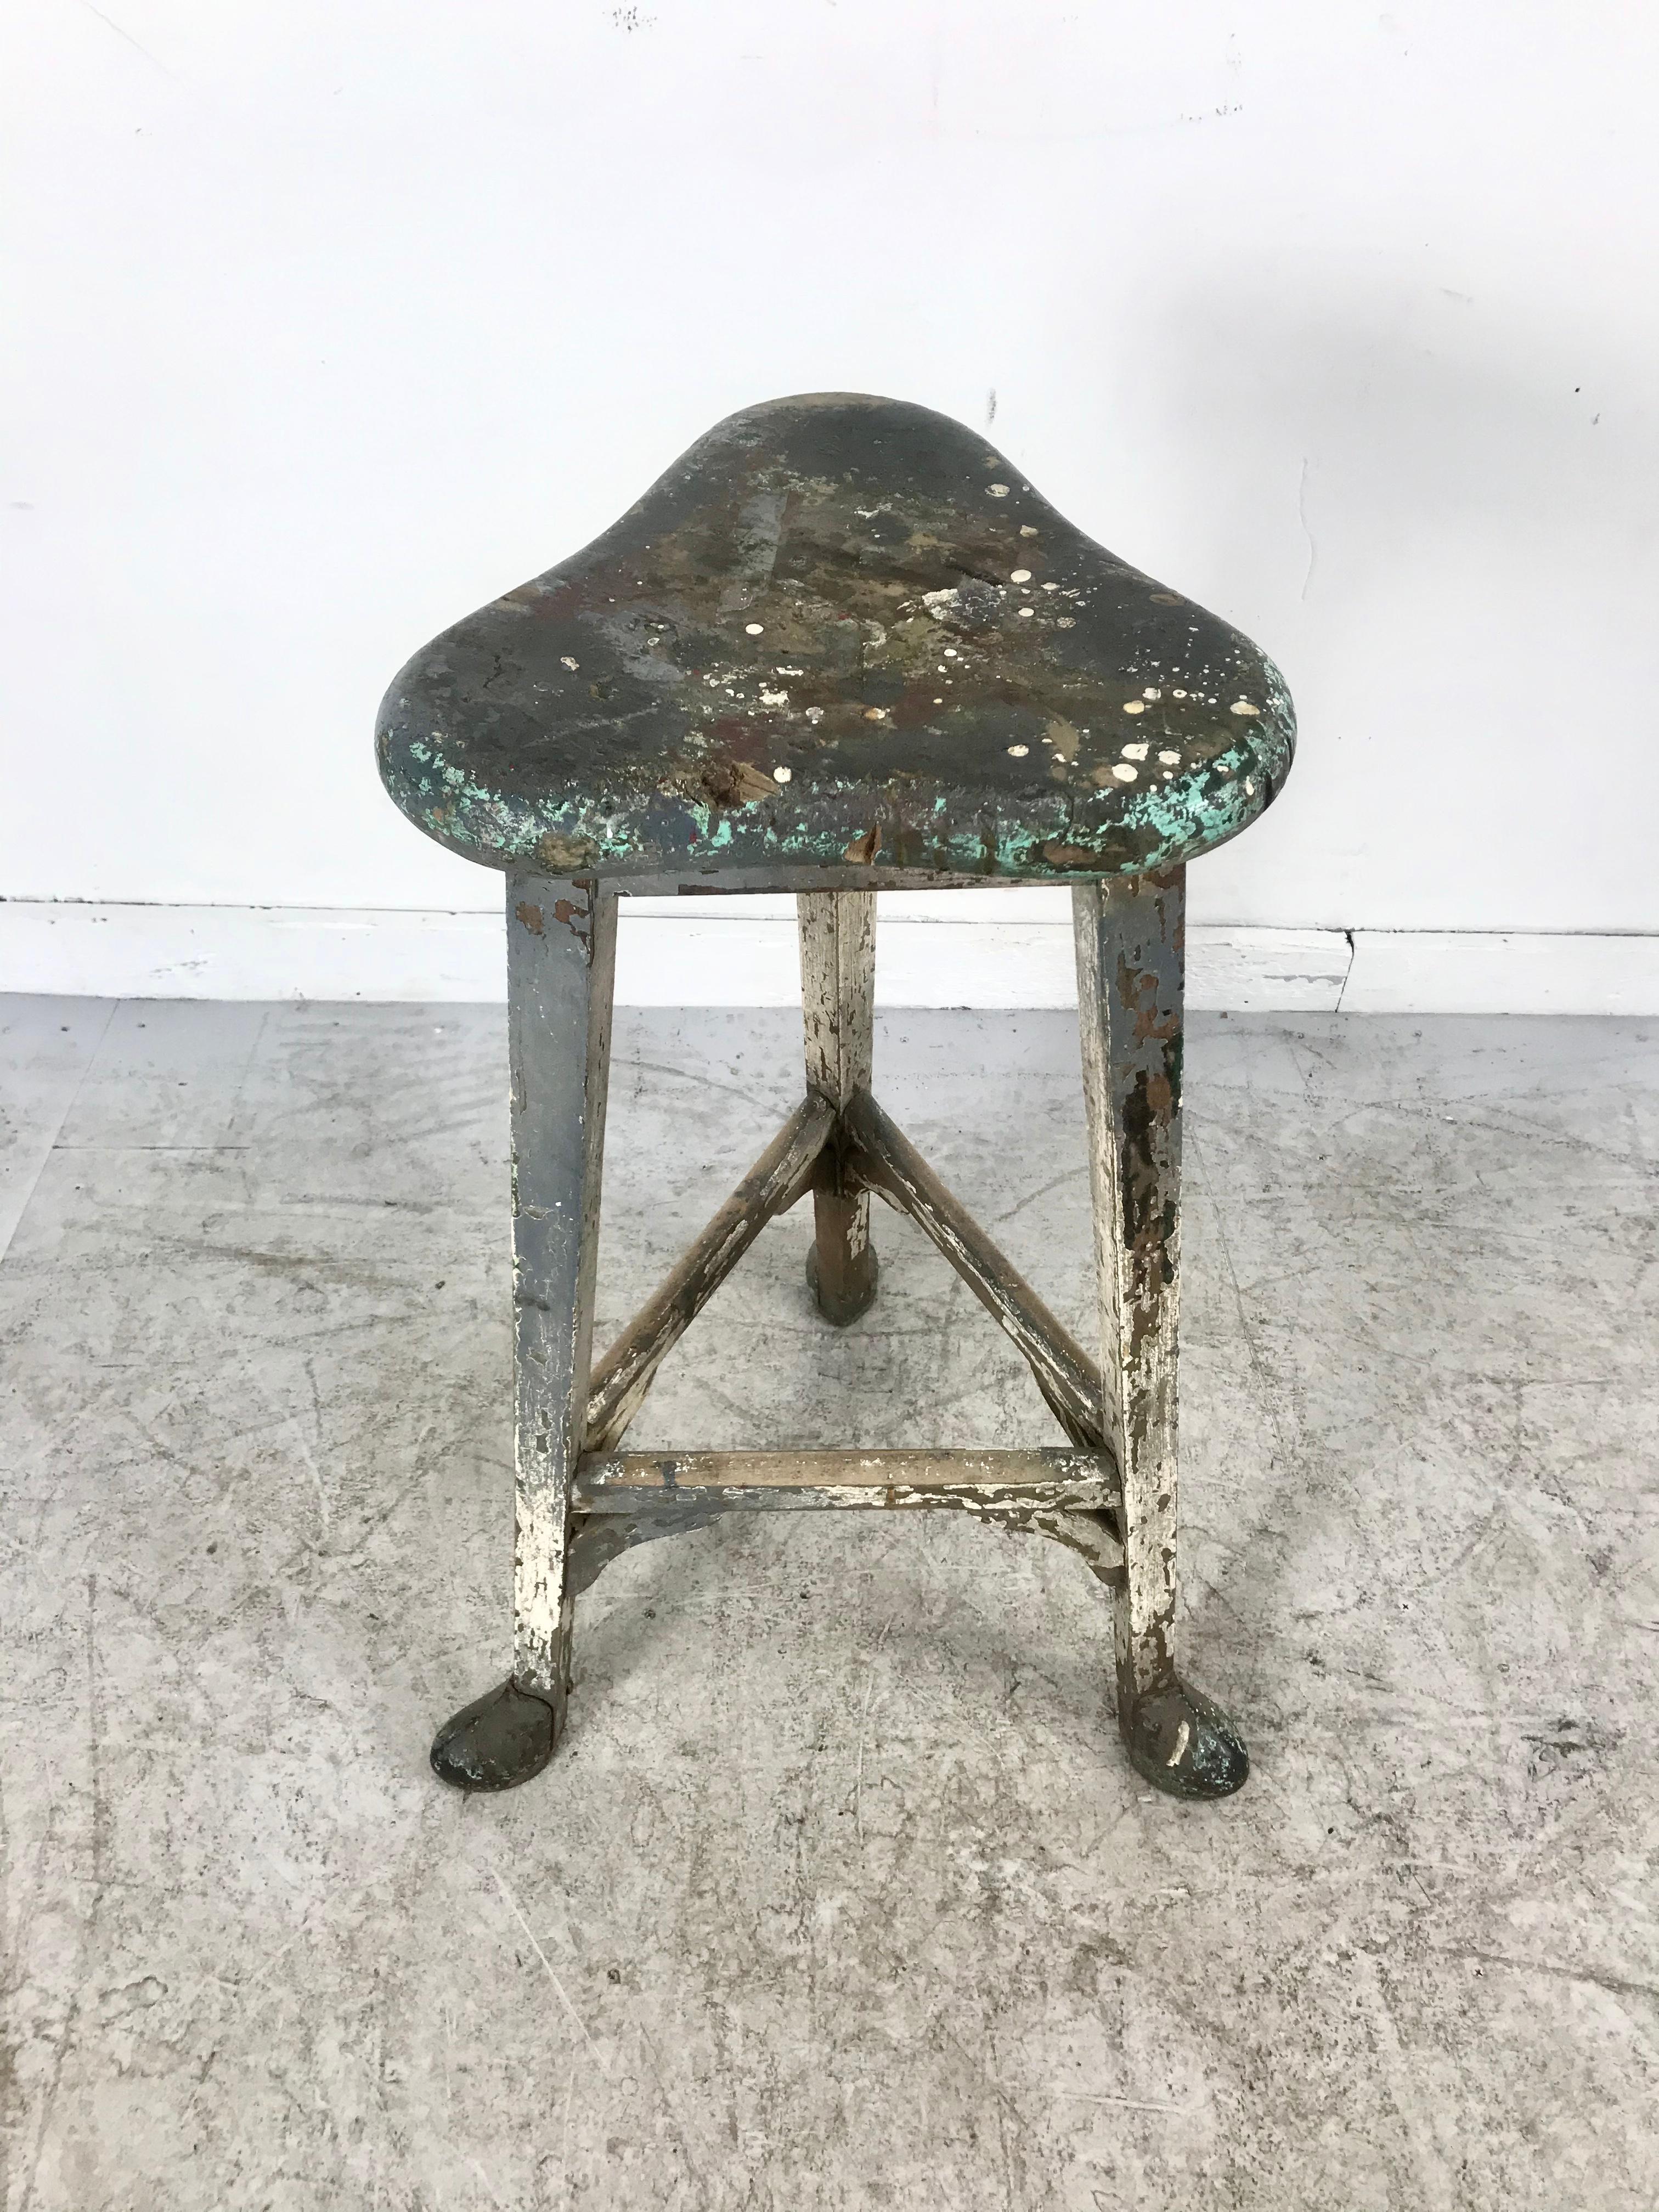 Early 20th Century French Industrial Artist Stool, circa 1900s, Amazing Patina, Metal Hoofed Feet